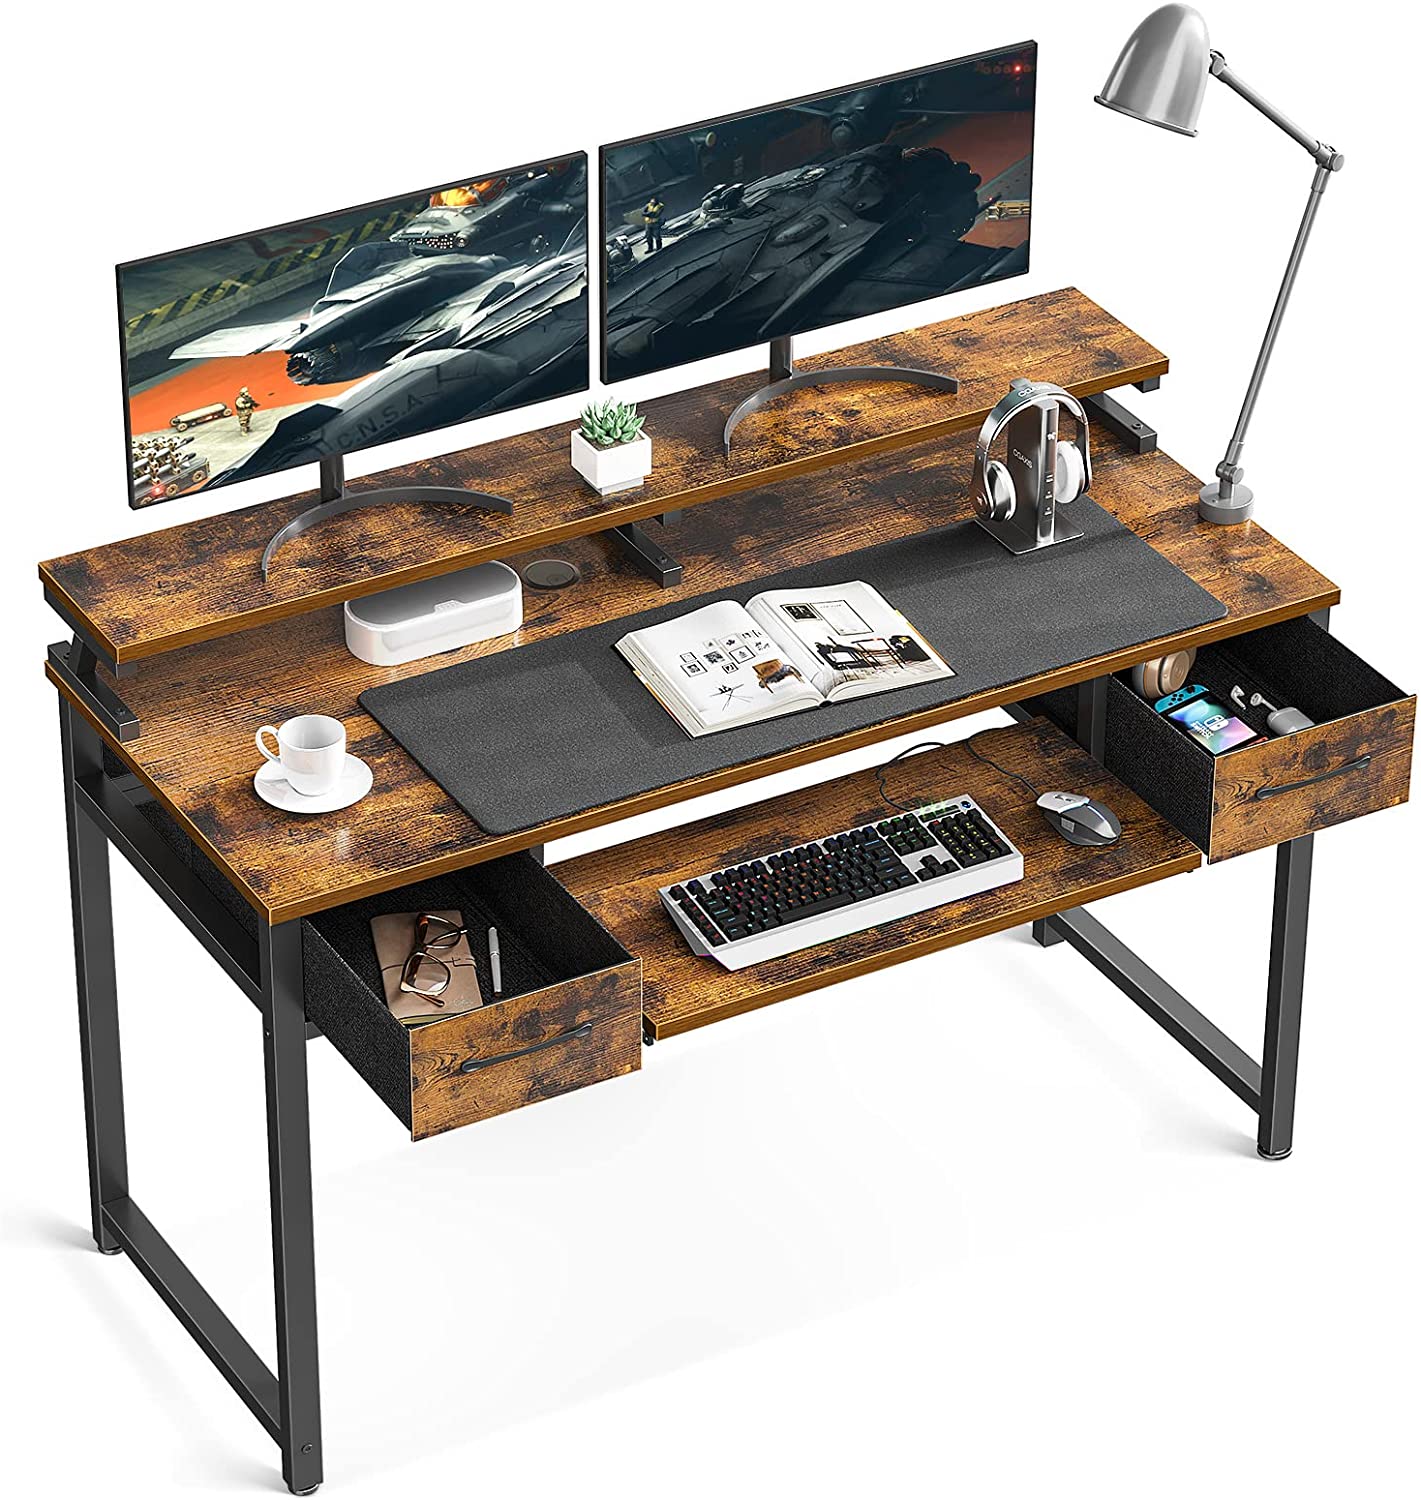 47 Inch Computer Desk with Keyboard Tray & Drawers